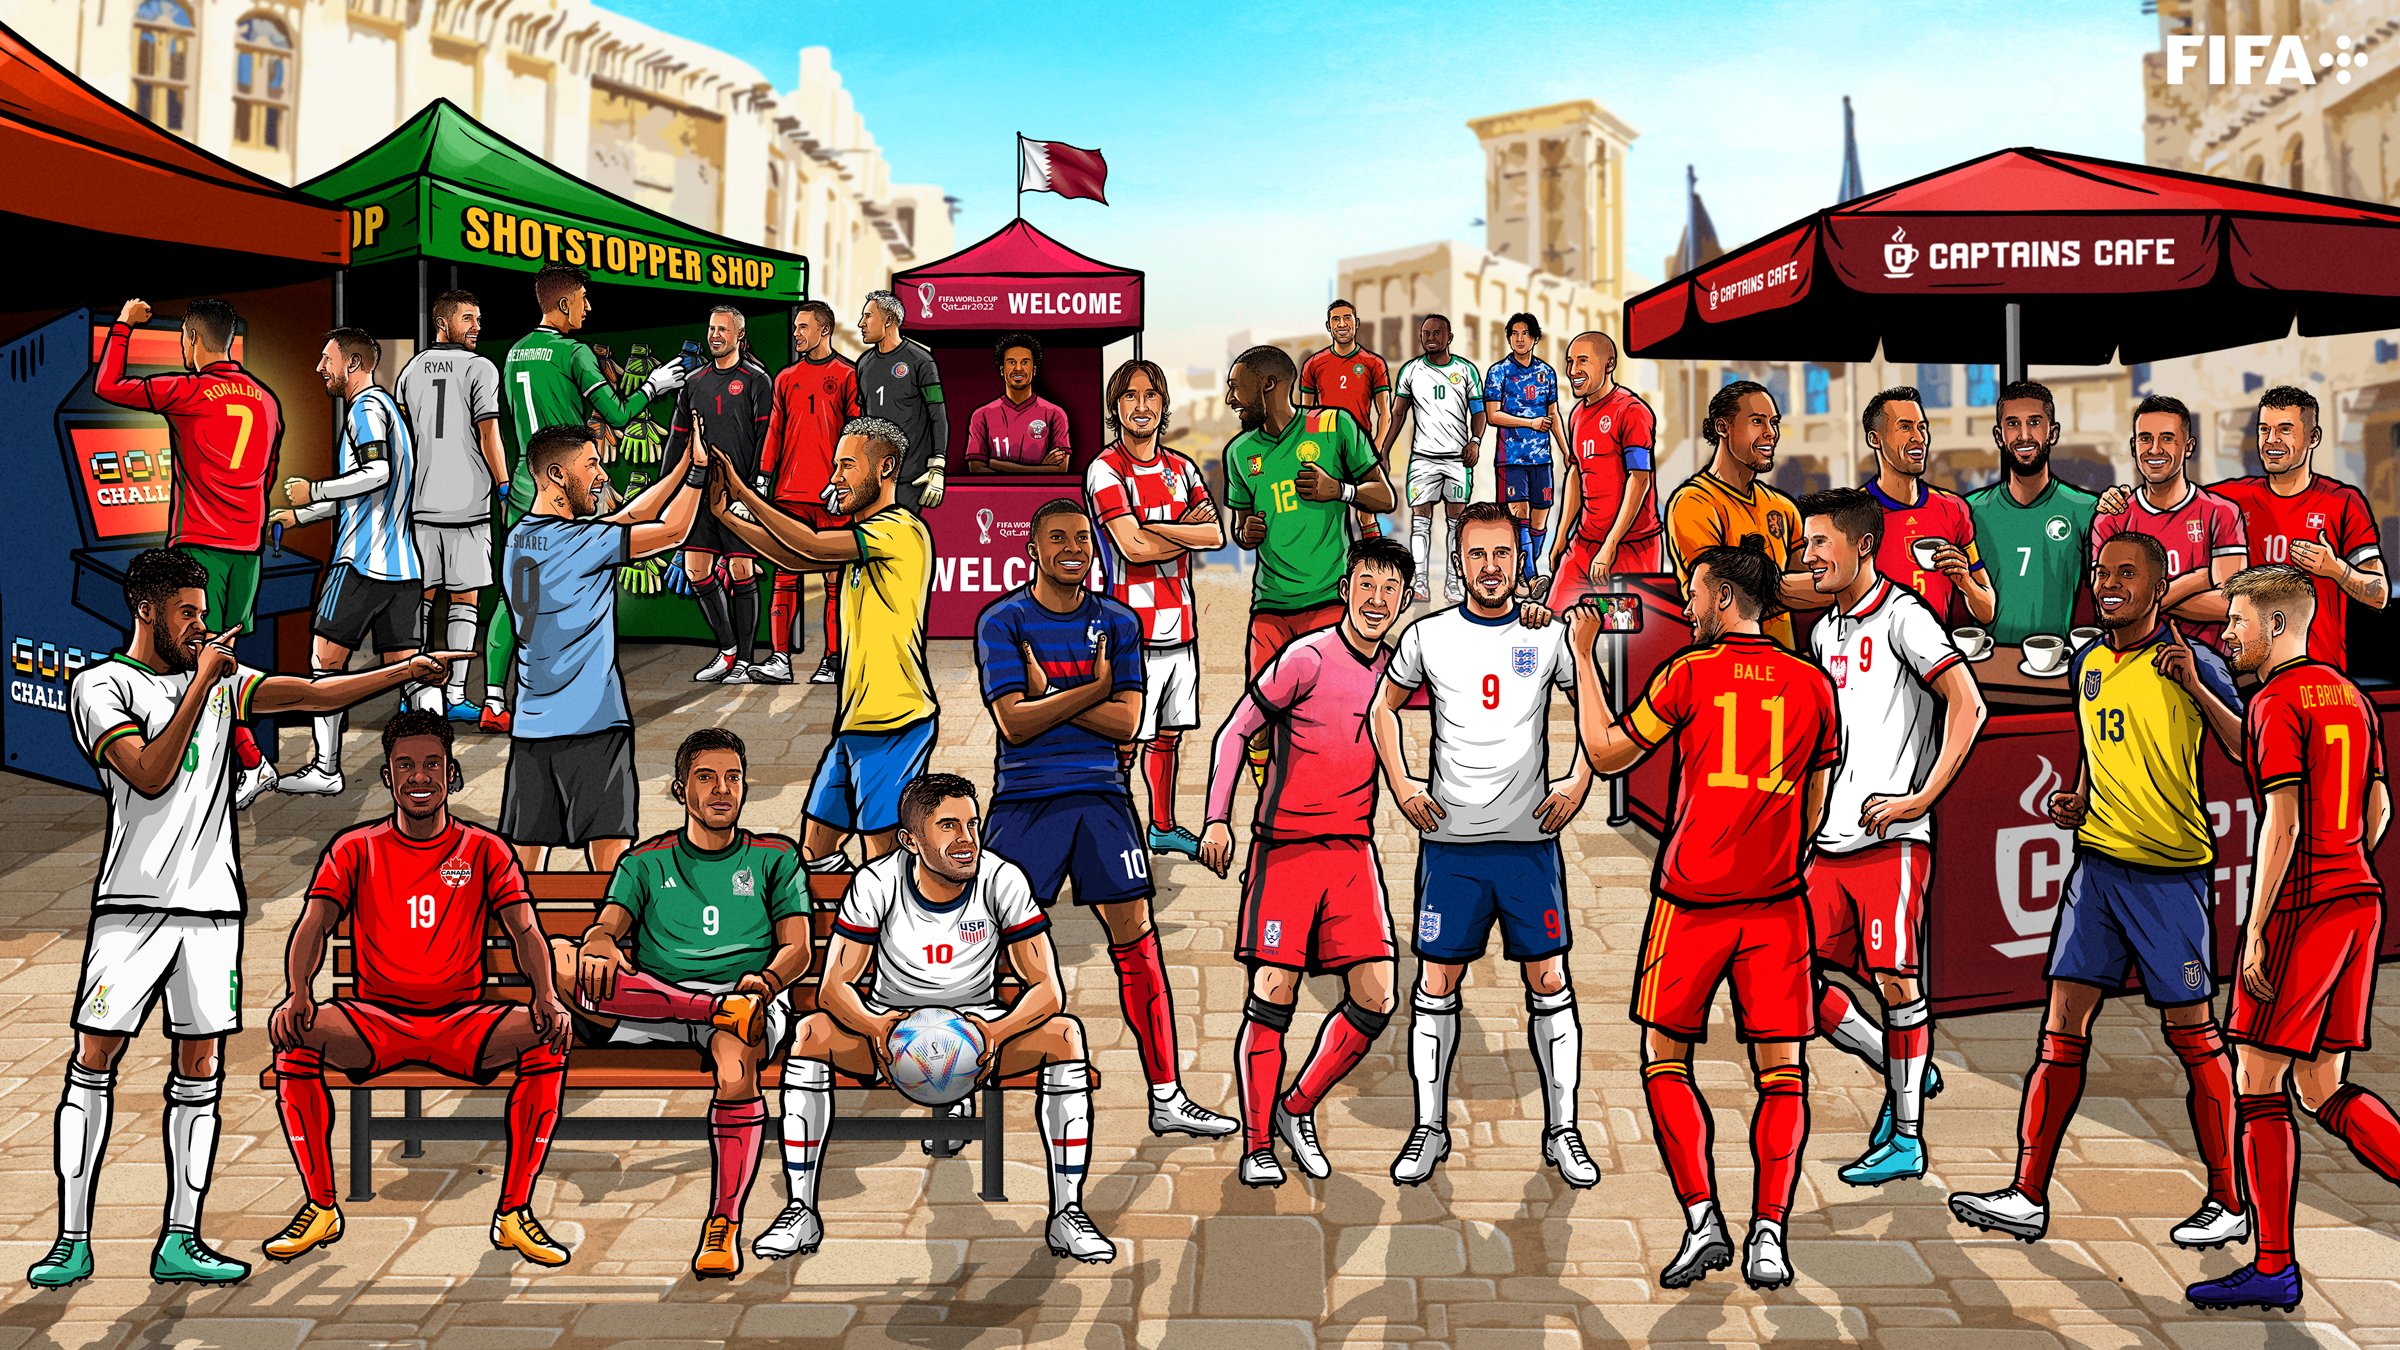 Partey Features In Poster For 2022 Fifa World Cup The Ghana Report